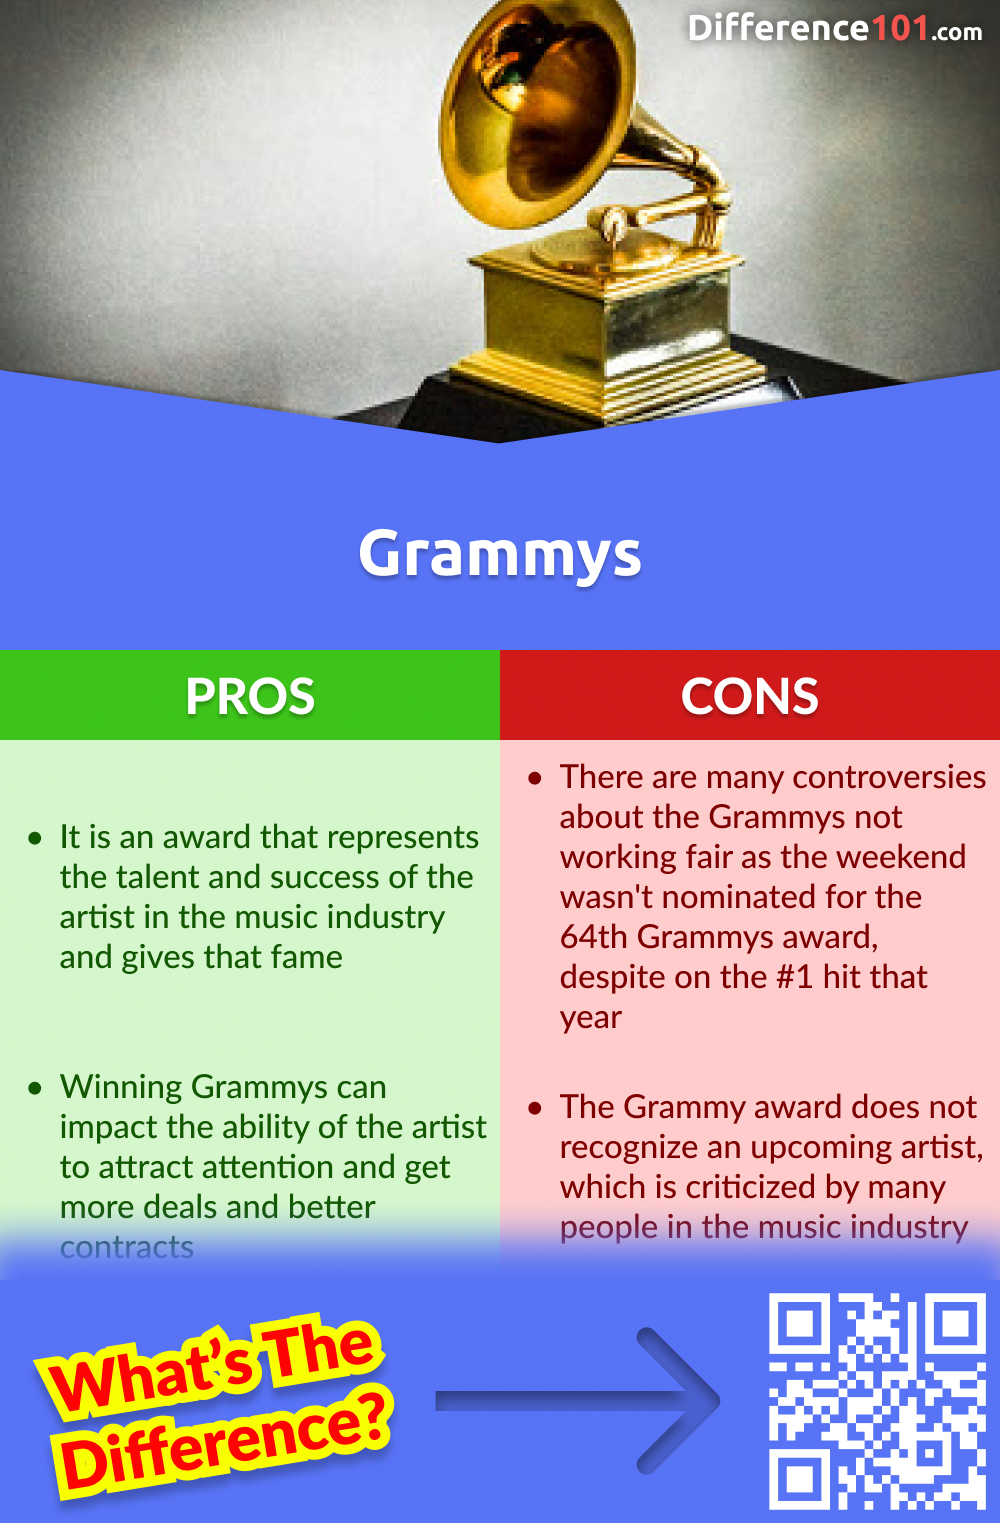 Pros and Cons of Grammys